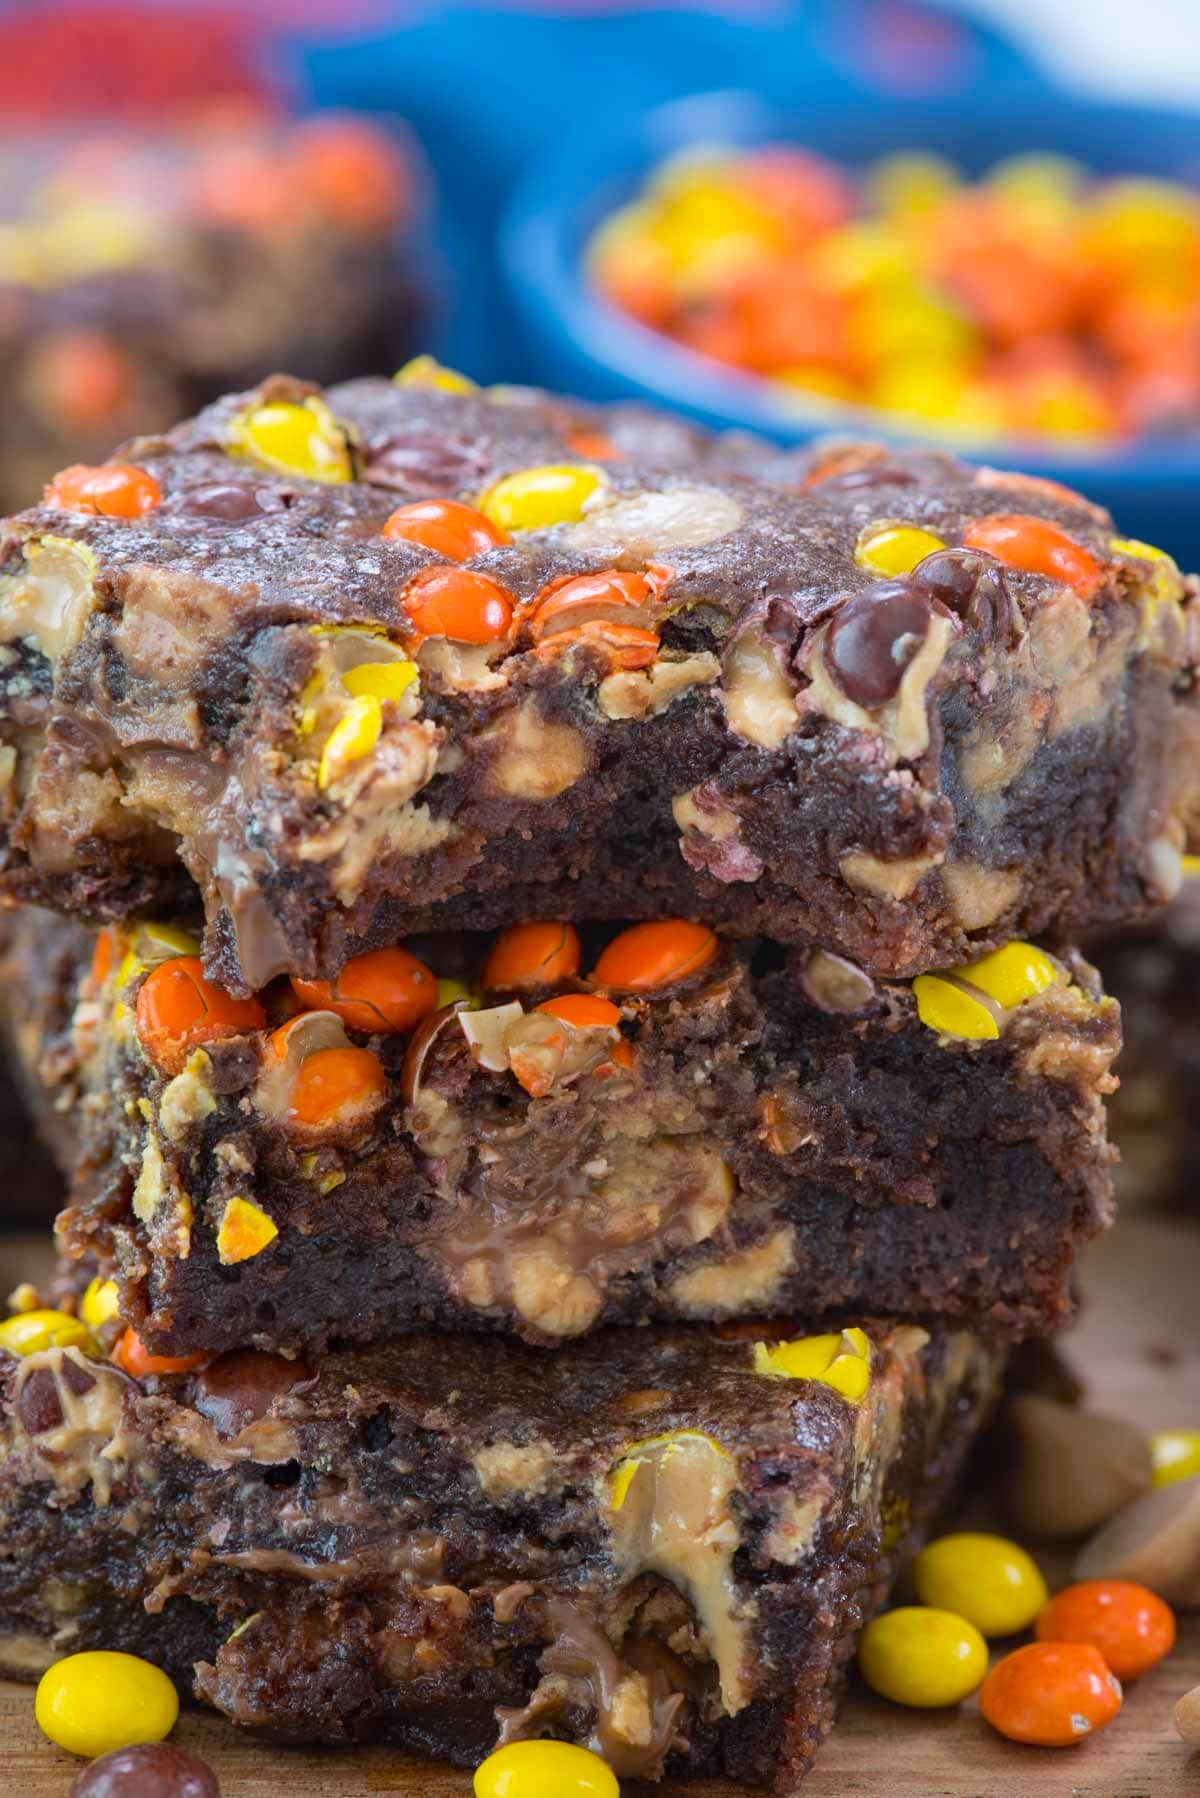 stacked brownies with yellow and orange reeses pieces baked inside.